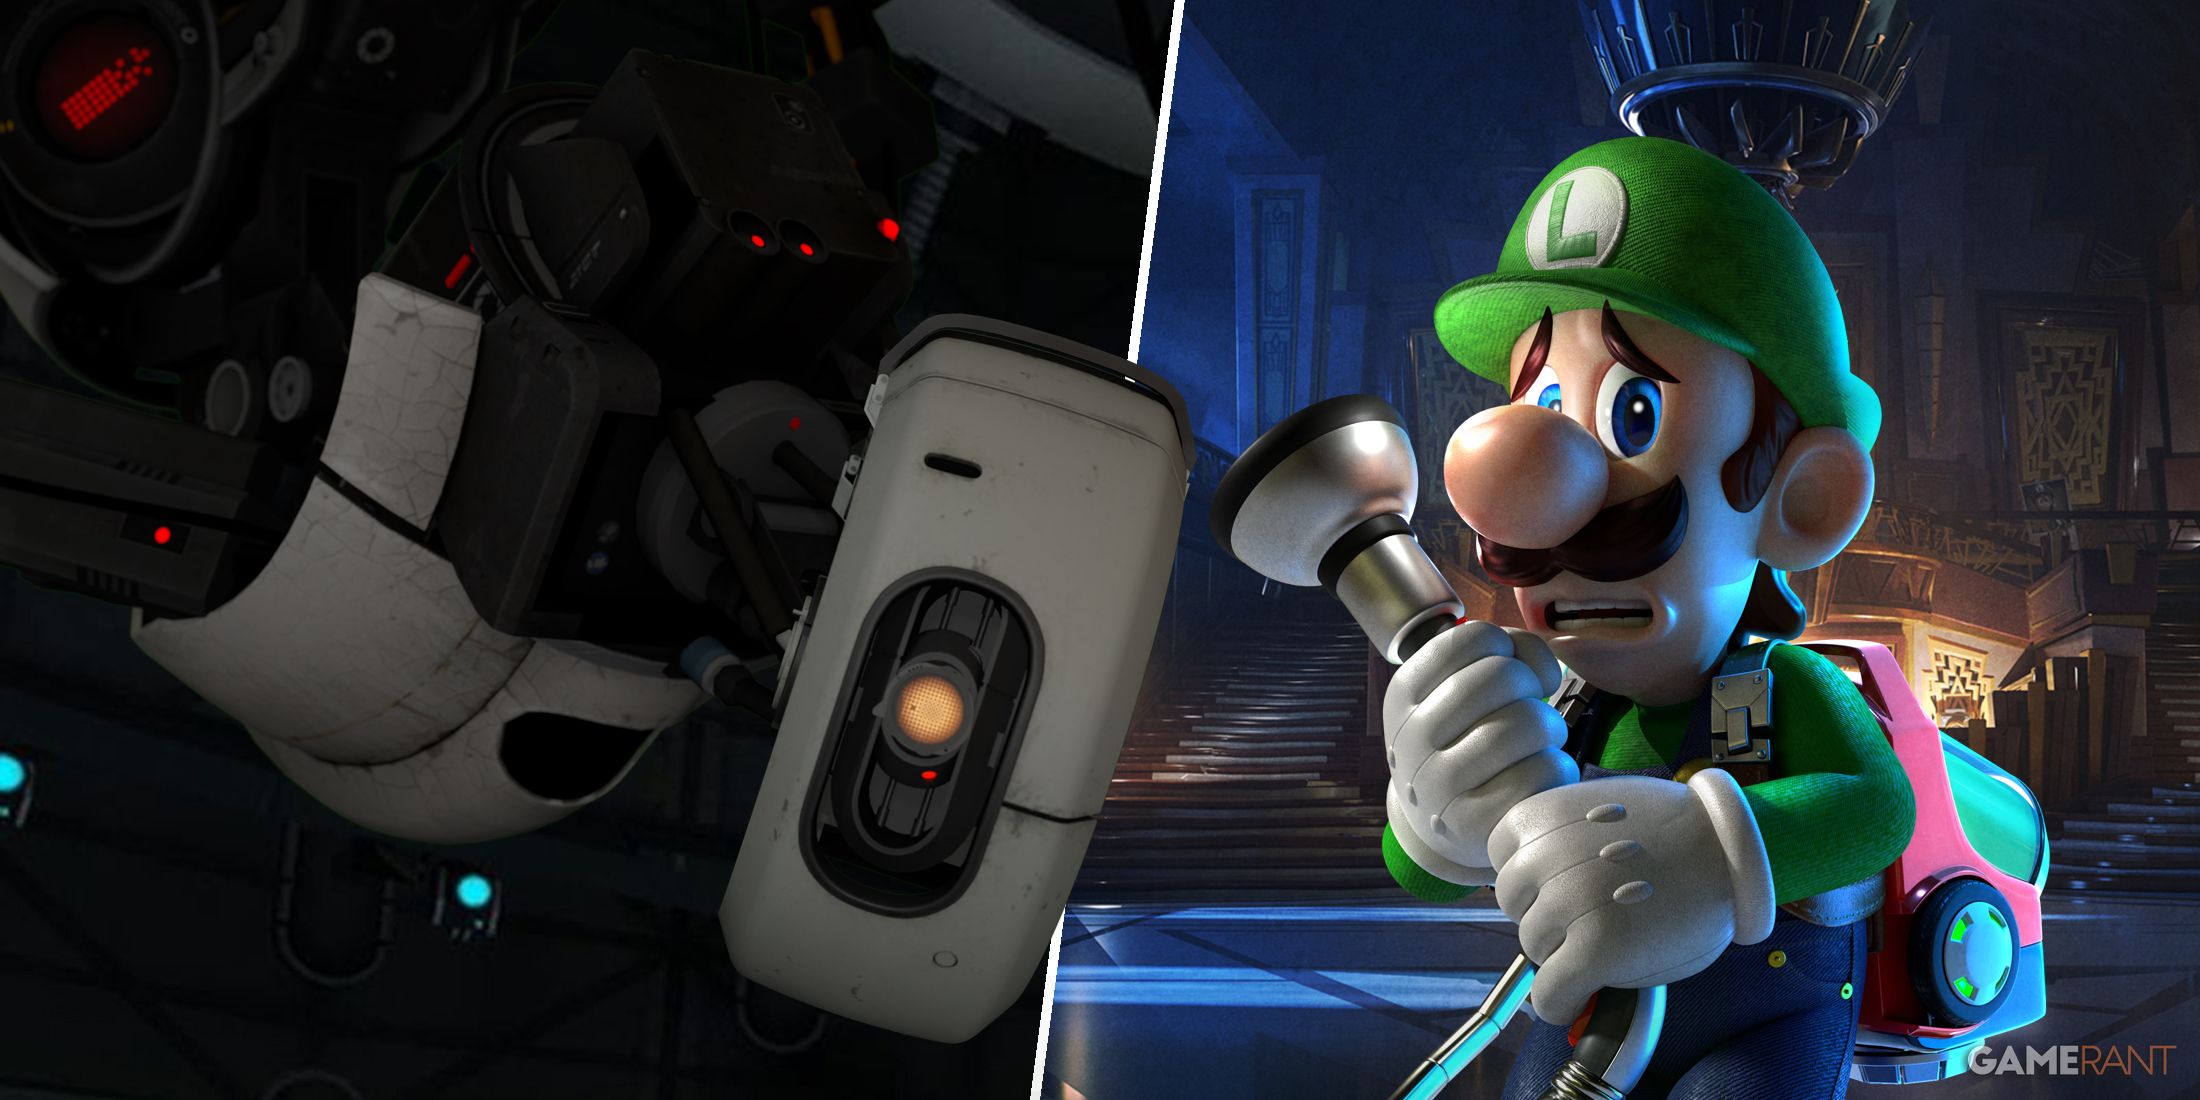 GLaDOS from Portal and Luigi from Luigi's Mansion